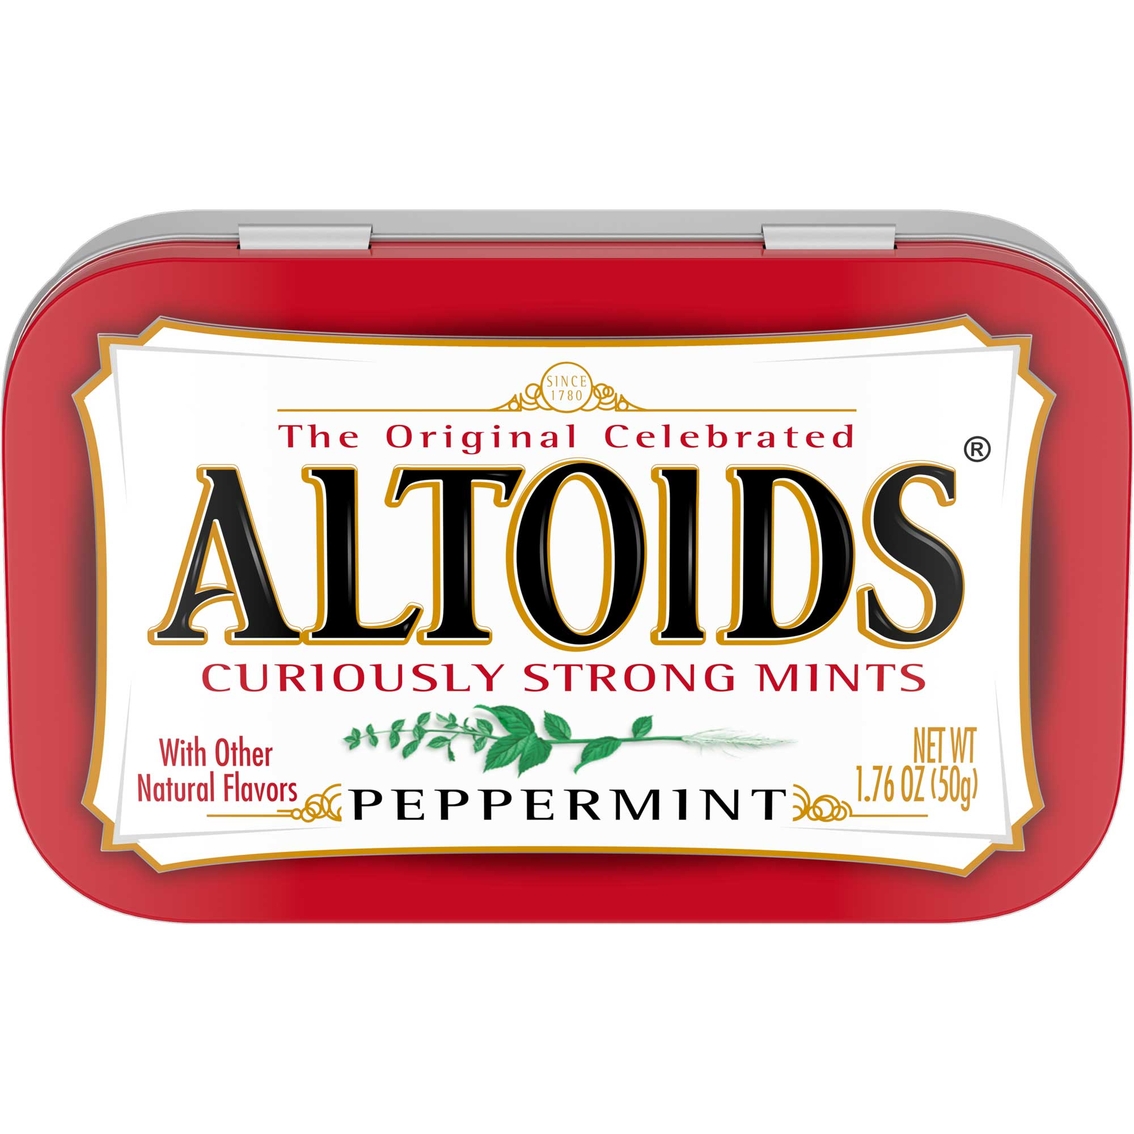 Altoids Peppermint 1.76 Oz. 2 Pk. | Candy & Chocolate | Food & Gifts ...